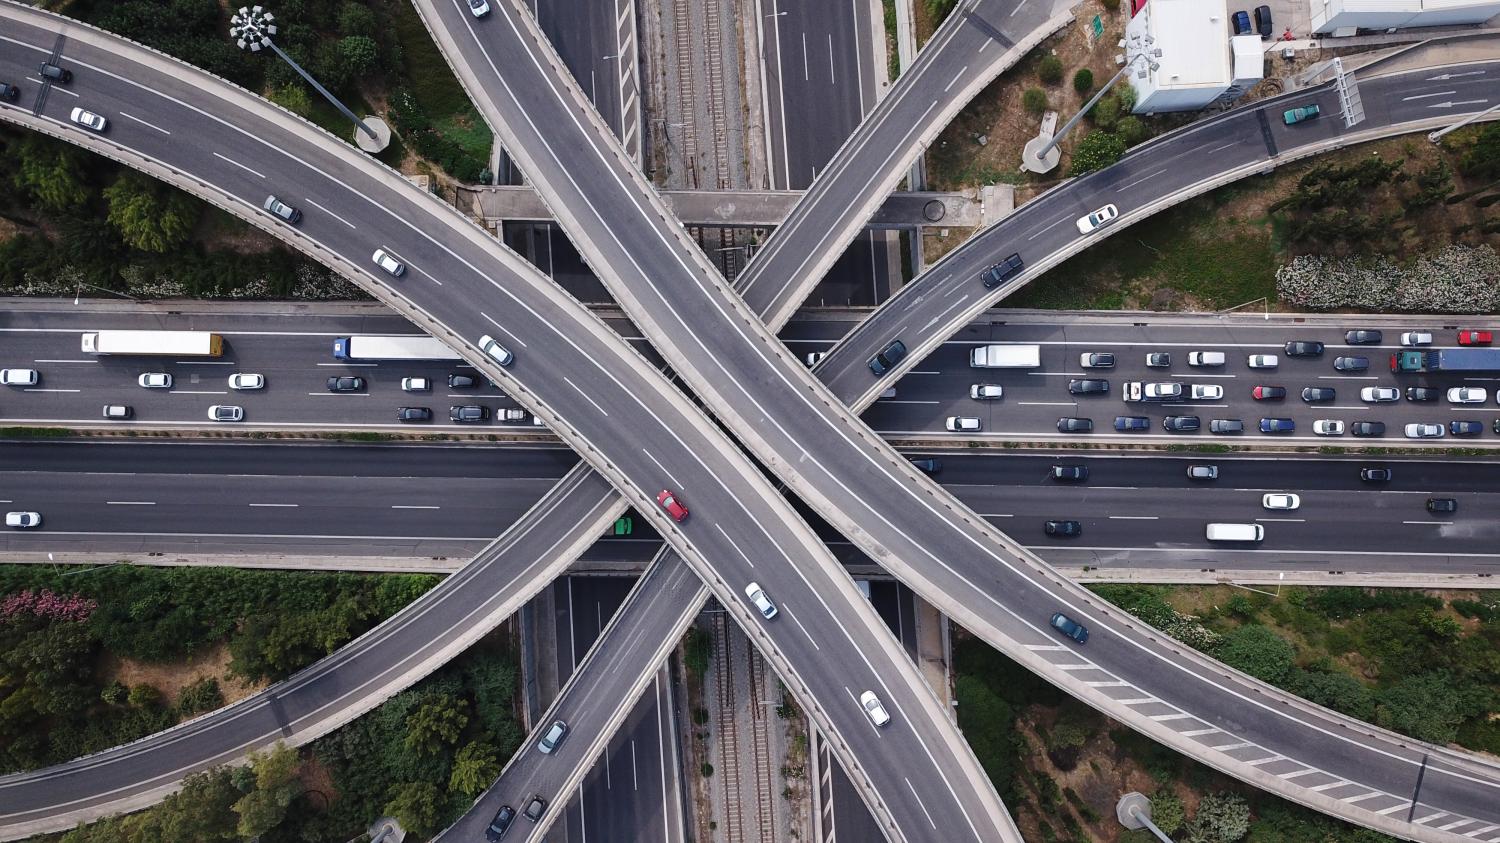 Aerial picture of crisscrossing highways.